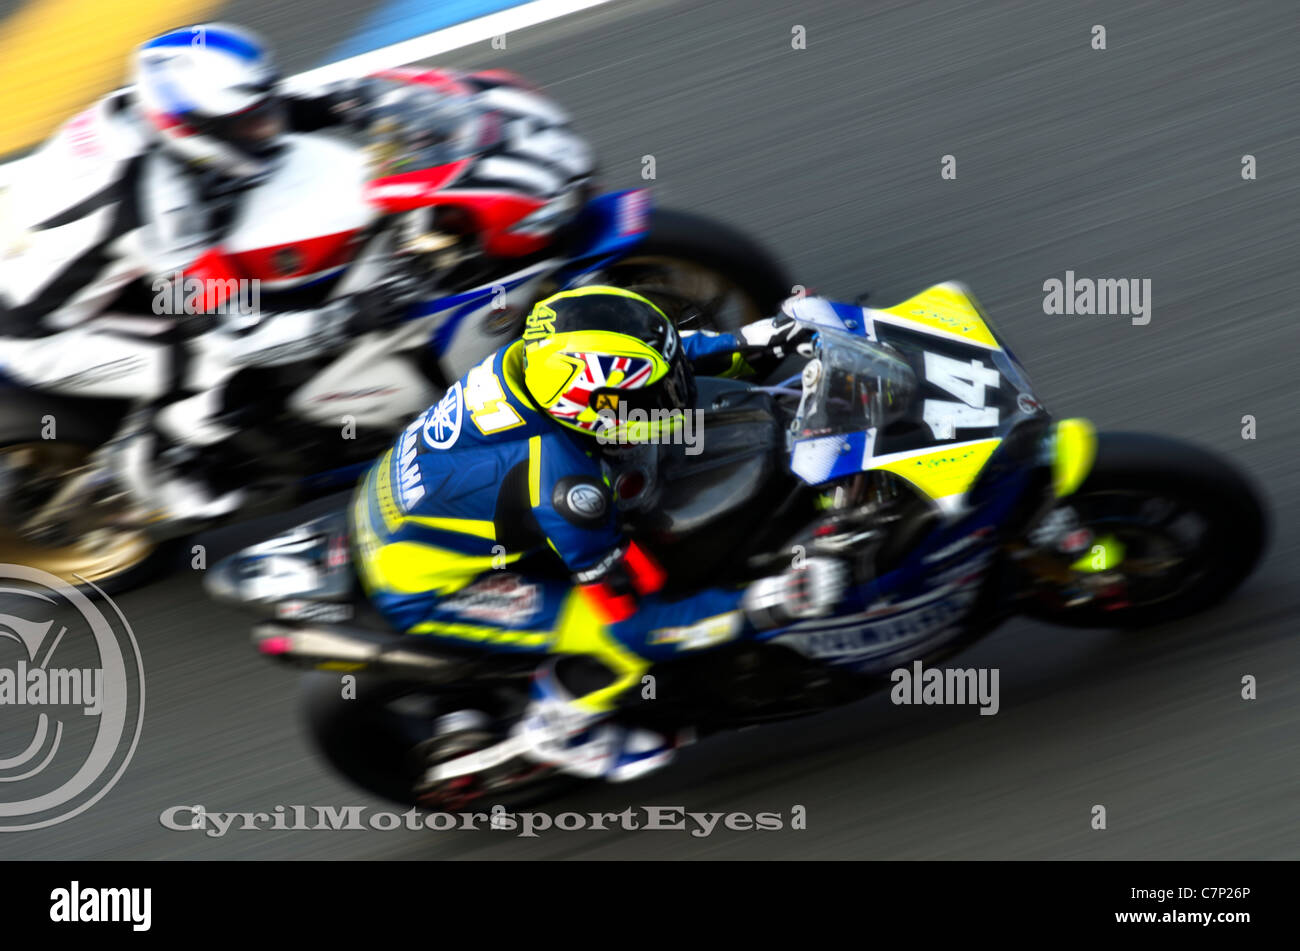 Yamaha 14 passing the Honda 6 during the 24 hours of Le Mans 2011 Stock Photo